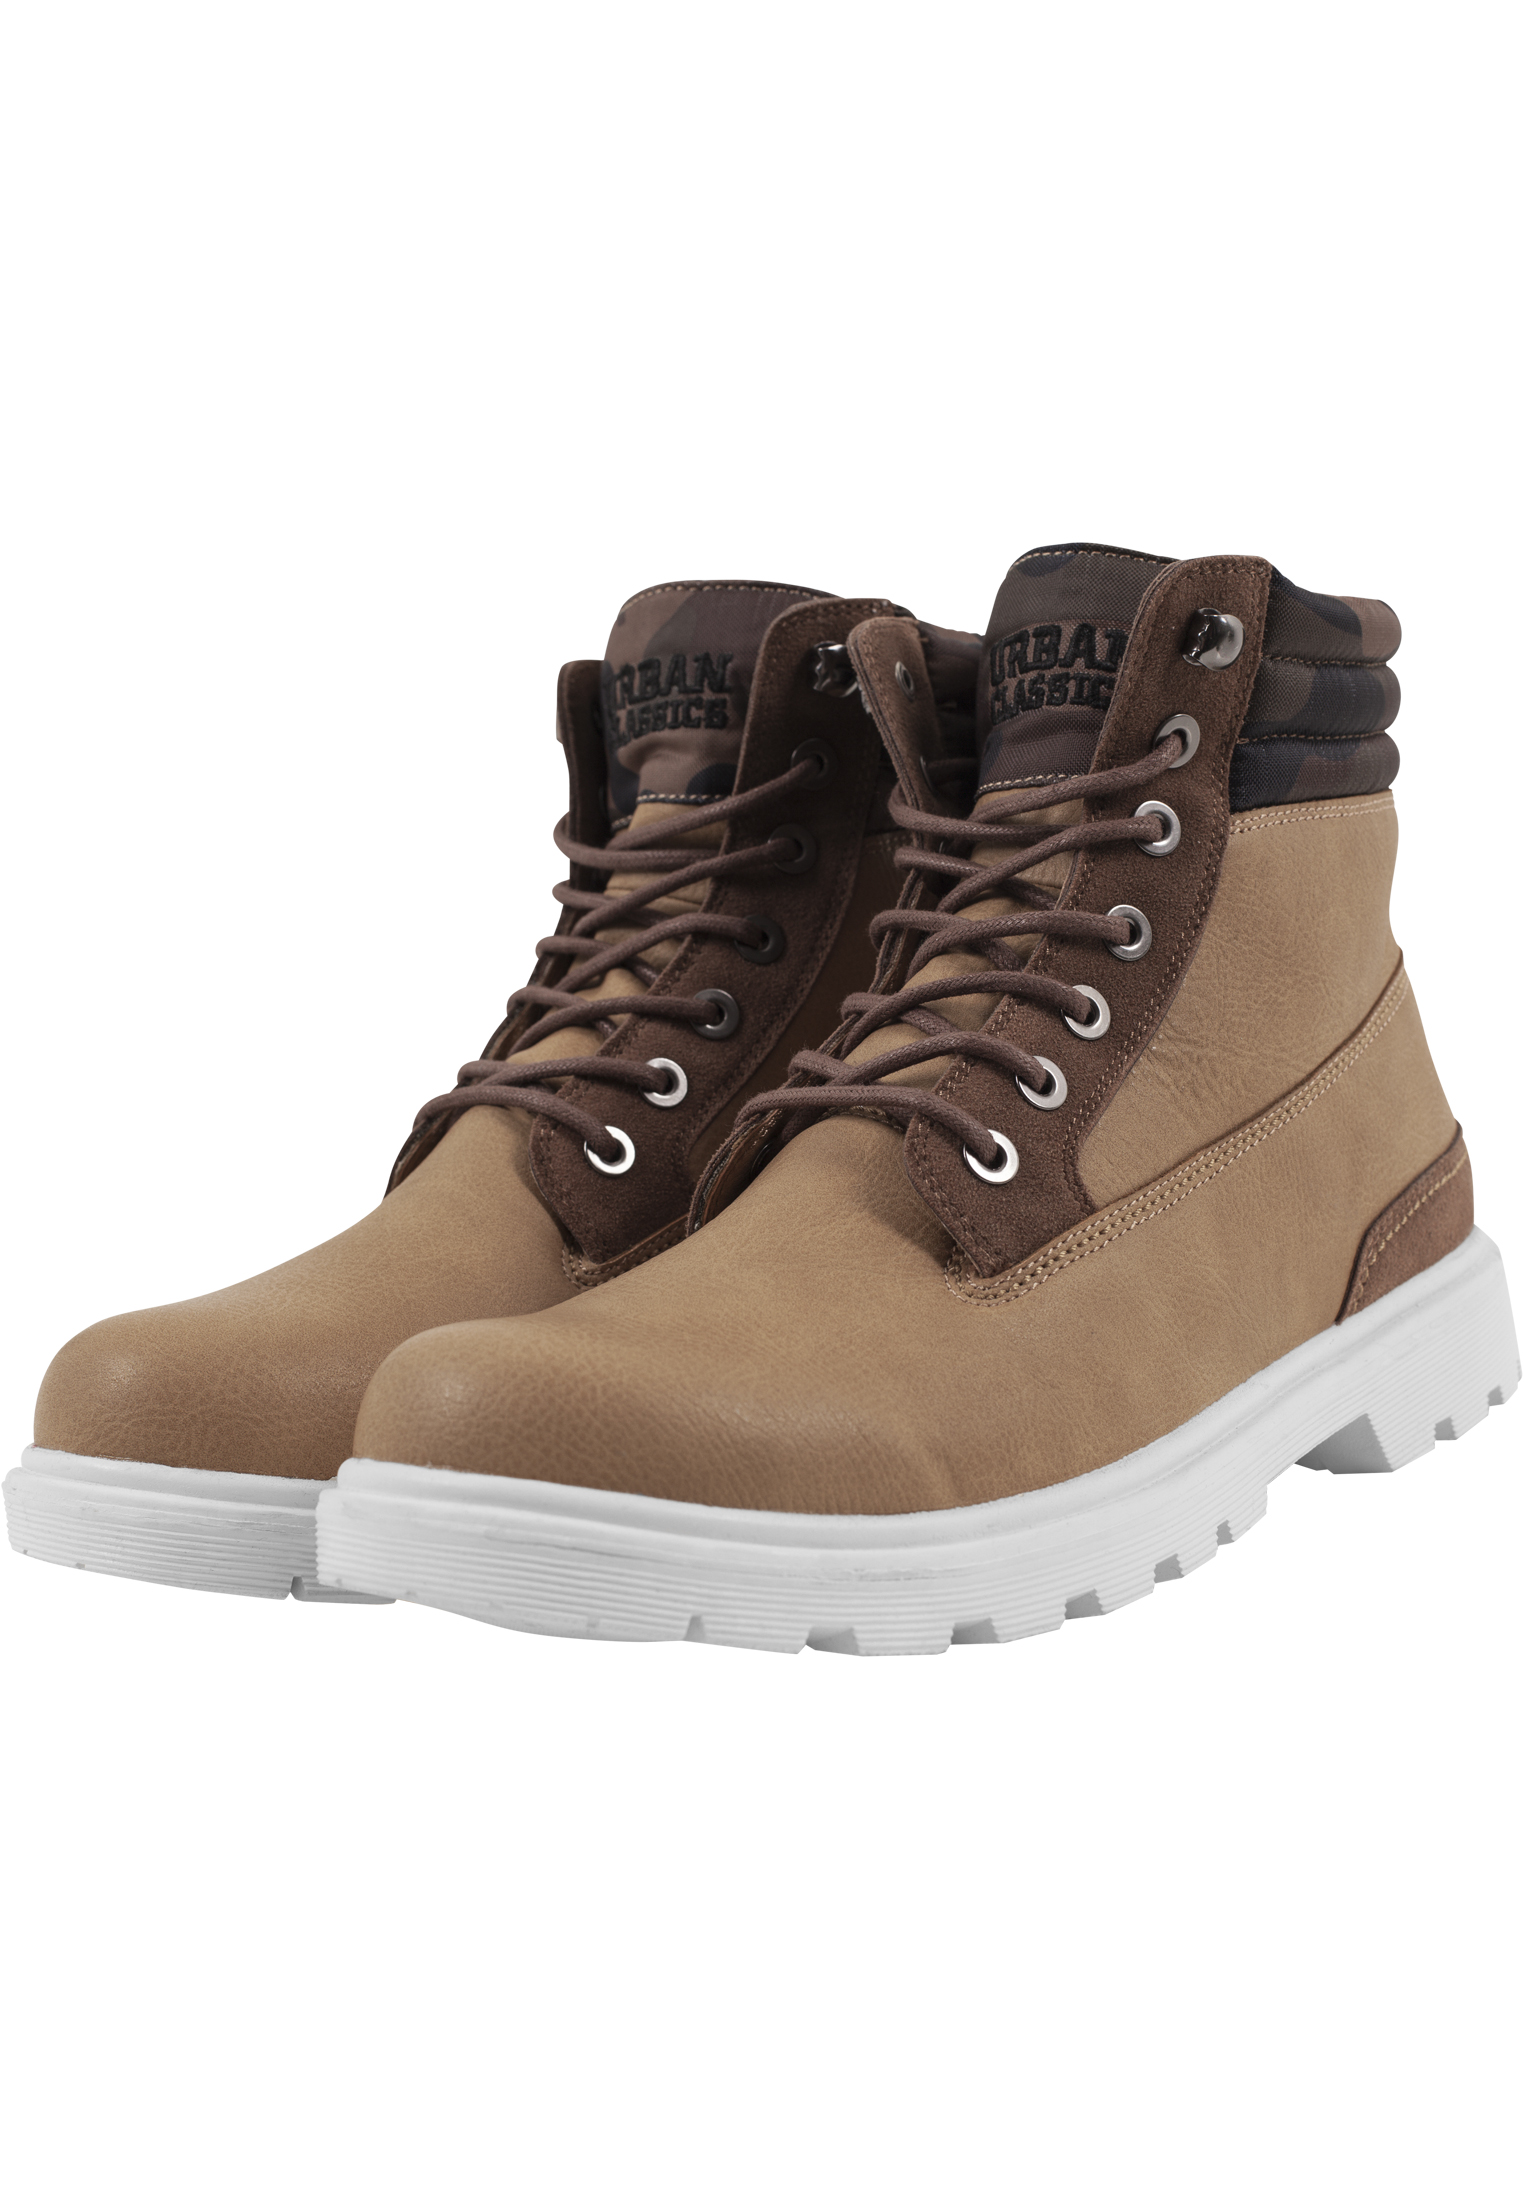 Schuhe Winter Boots in Farbe beige/woodcamo